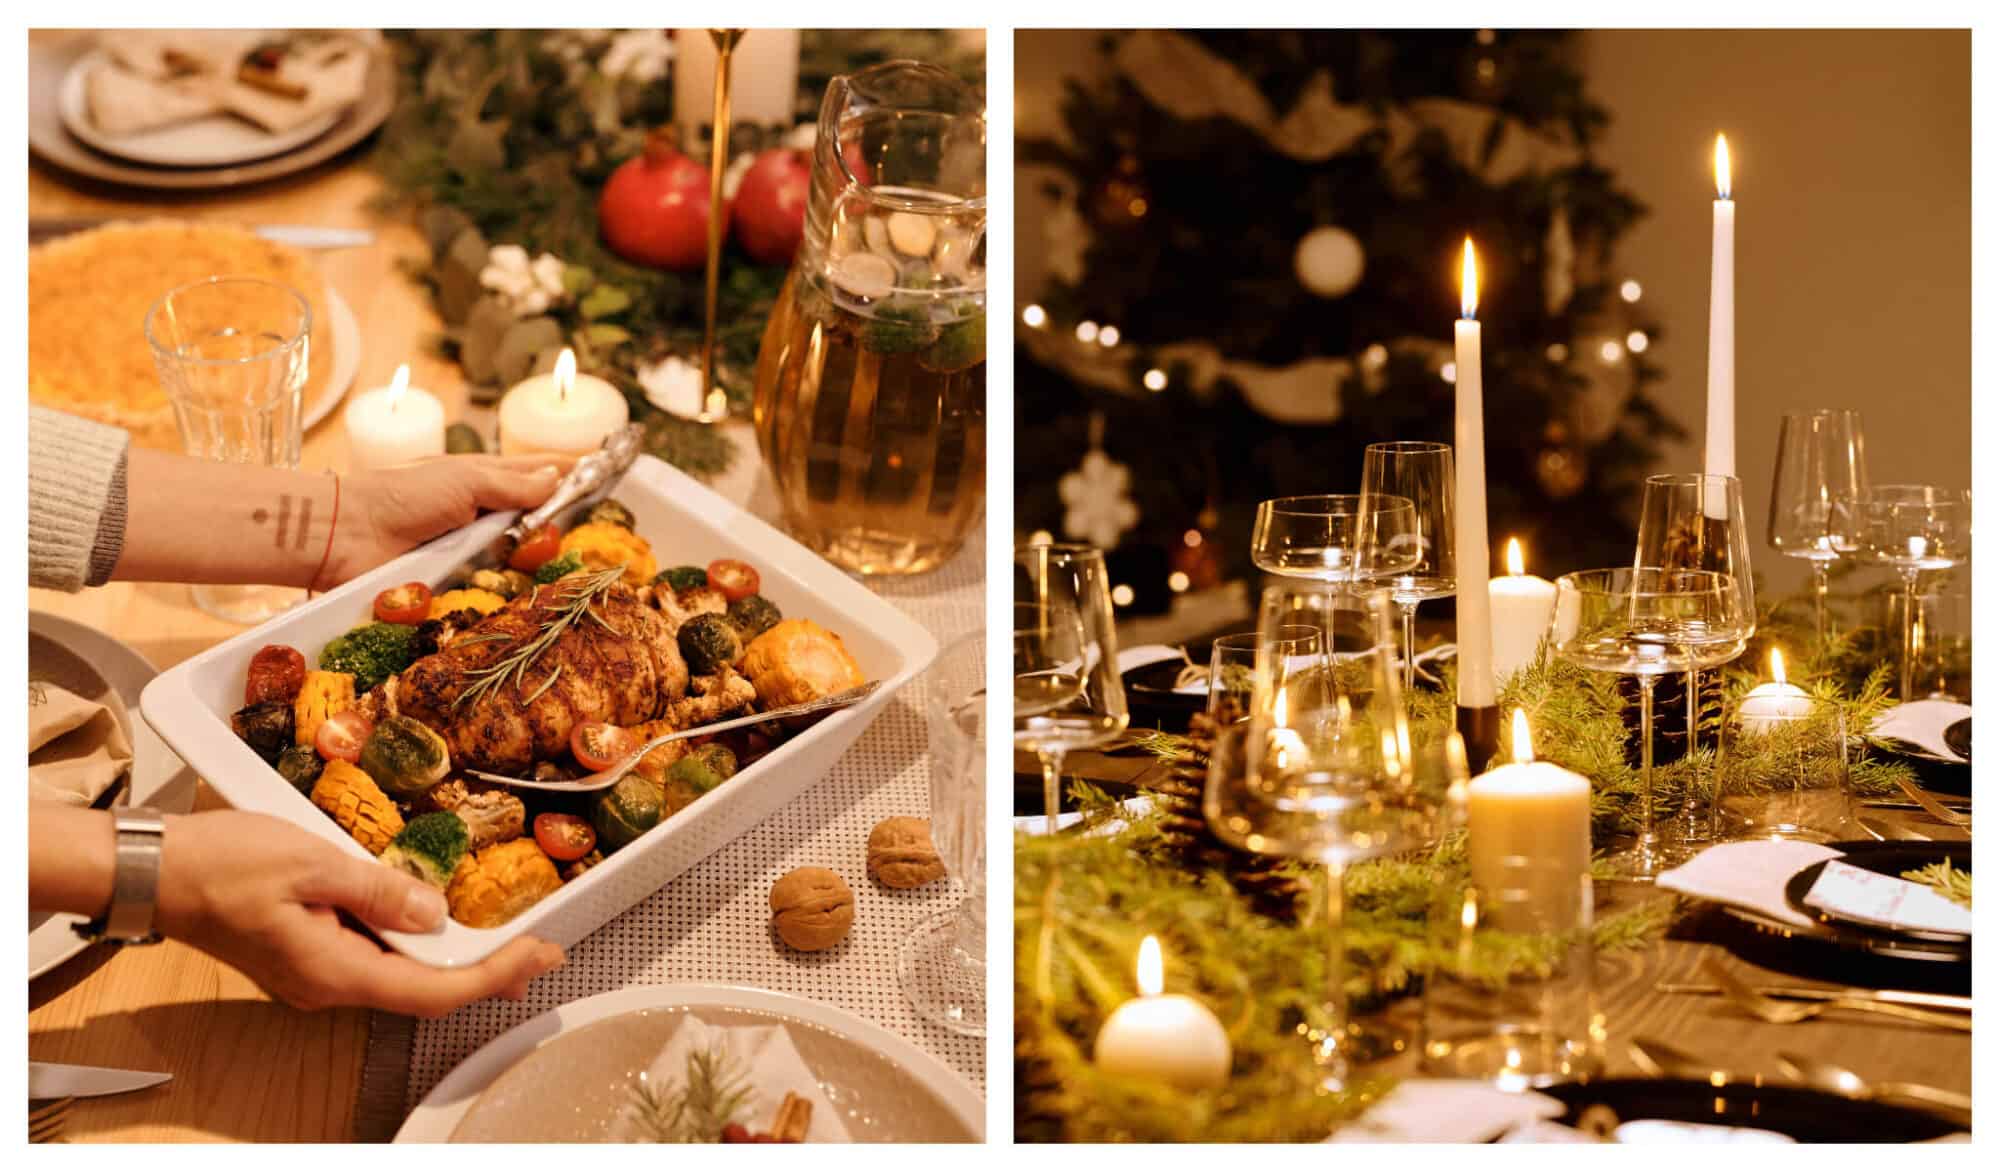 Left: A dinner host serves a nicely roasted Turkey for dinner; Right: A candlelit Christmas dinner table for 6.